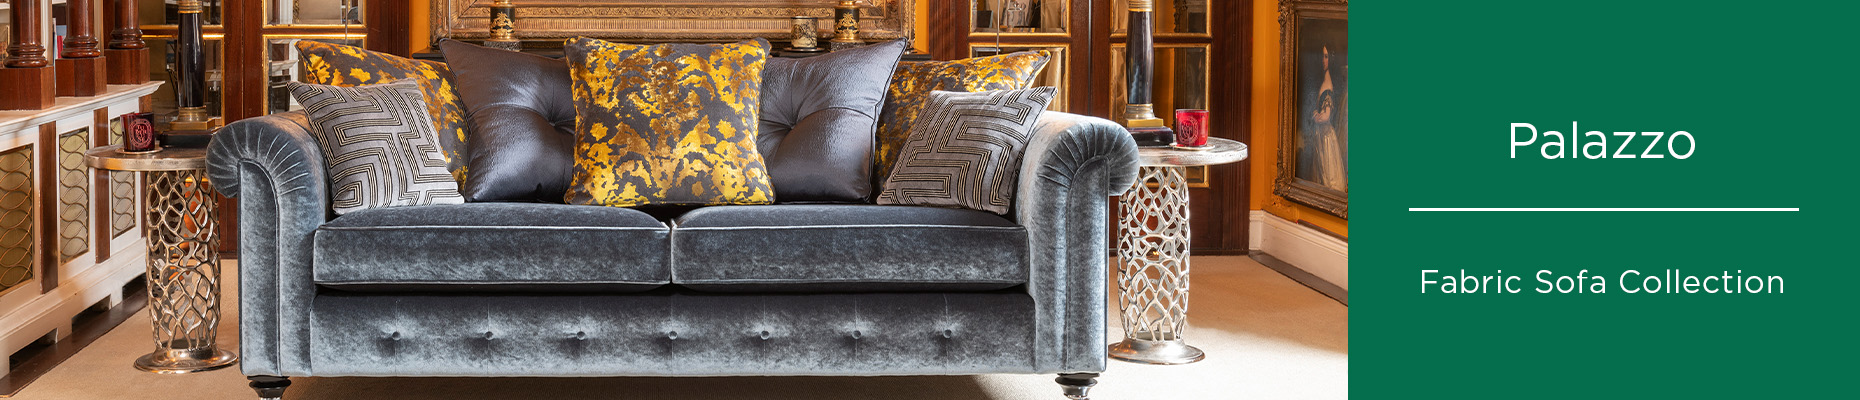 Palazzo sofa collection at Forrest Furnishing